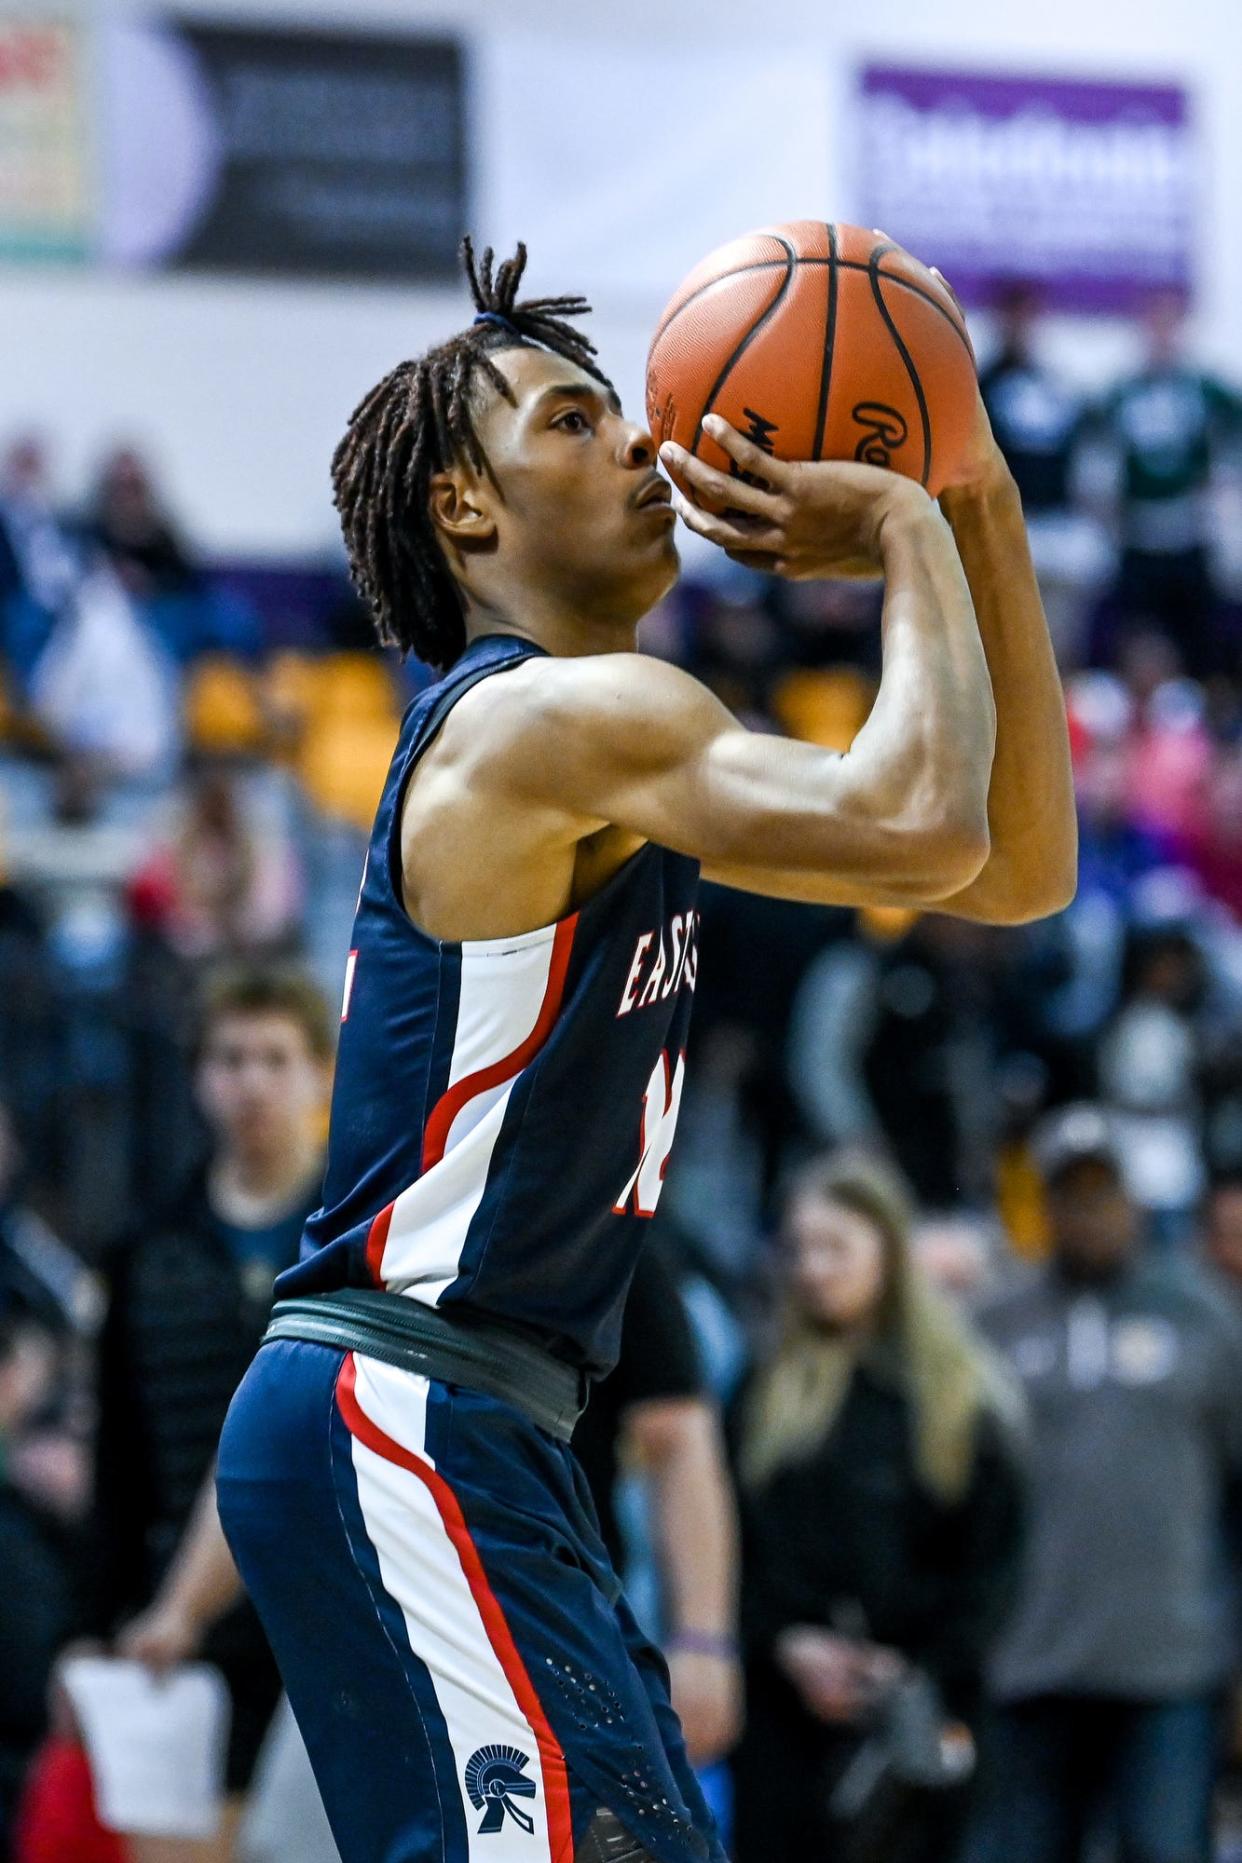 East Lansing's Jayce Branson attempts a 3-pointer against Muskegon during the fourth quarter on Tuesday, March 21, 2023, at Caledonia High School.